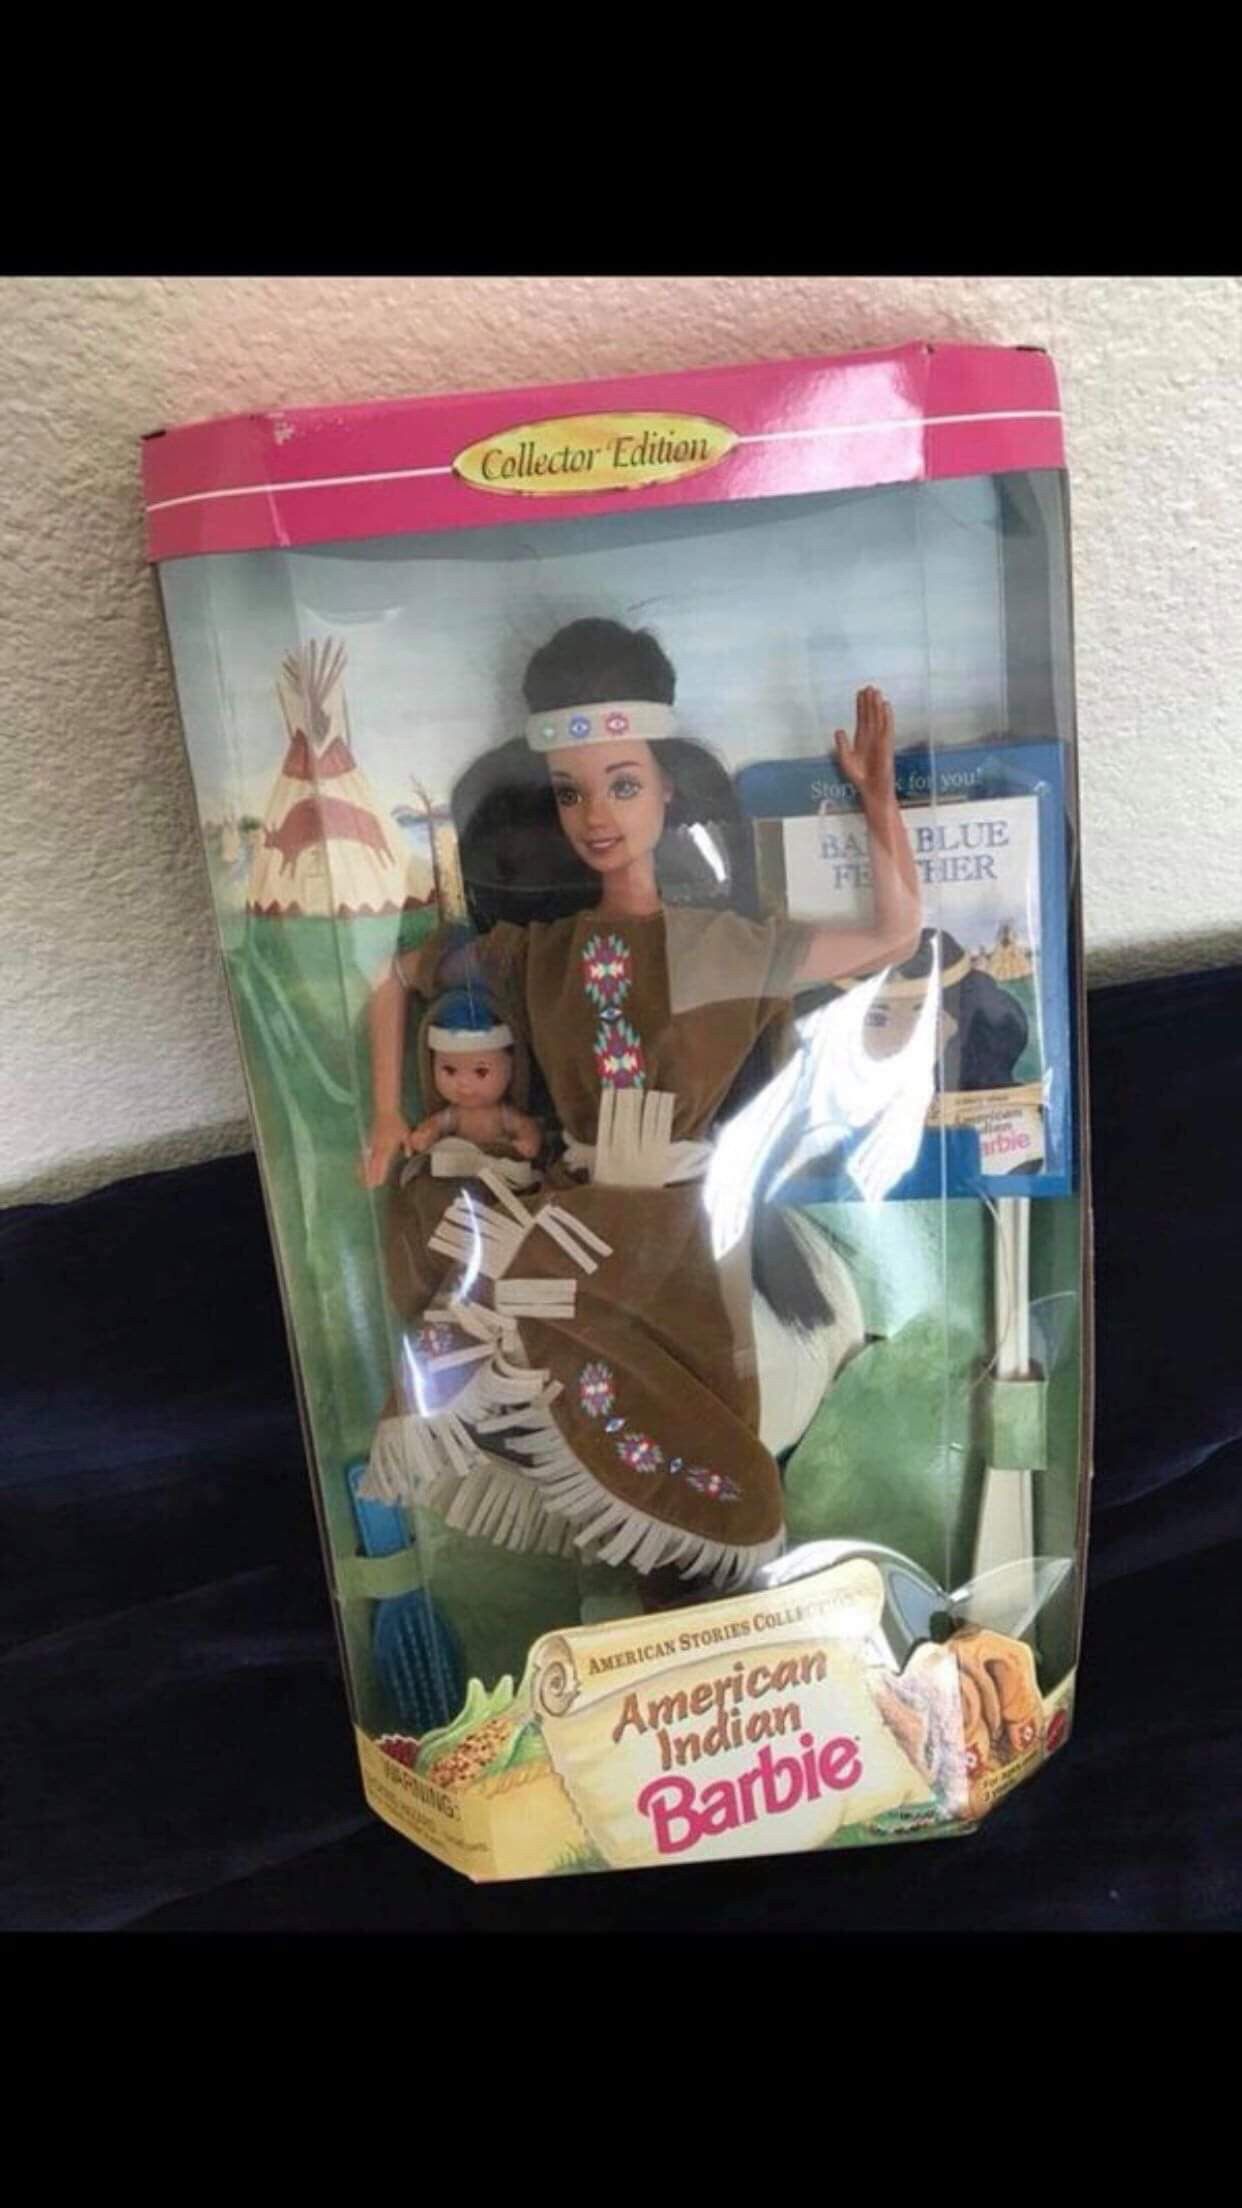 New American Indian barbie